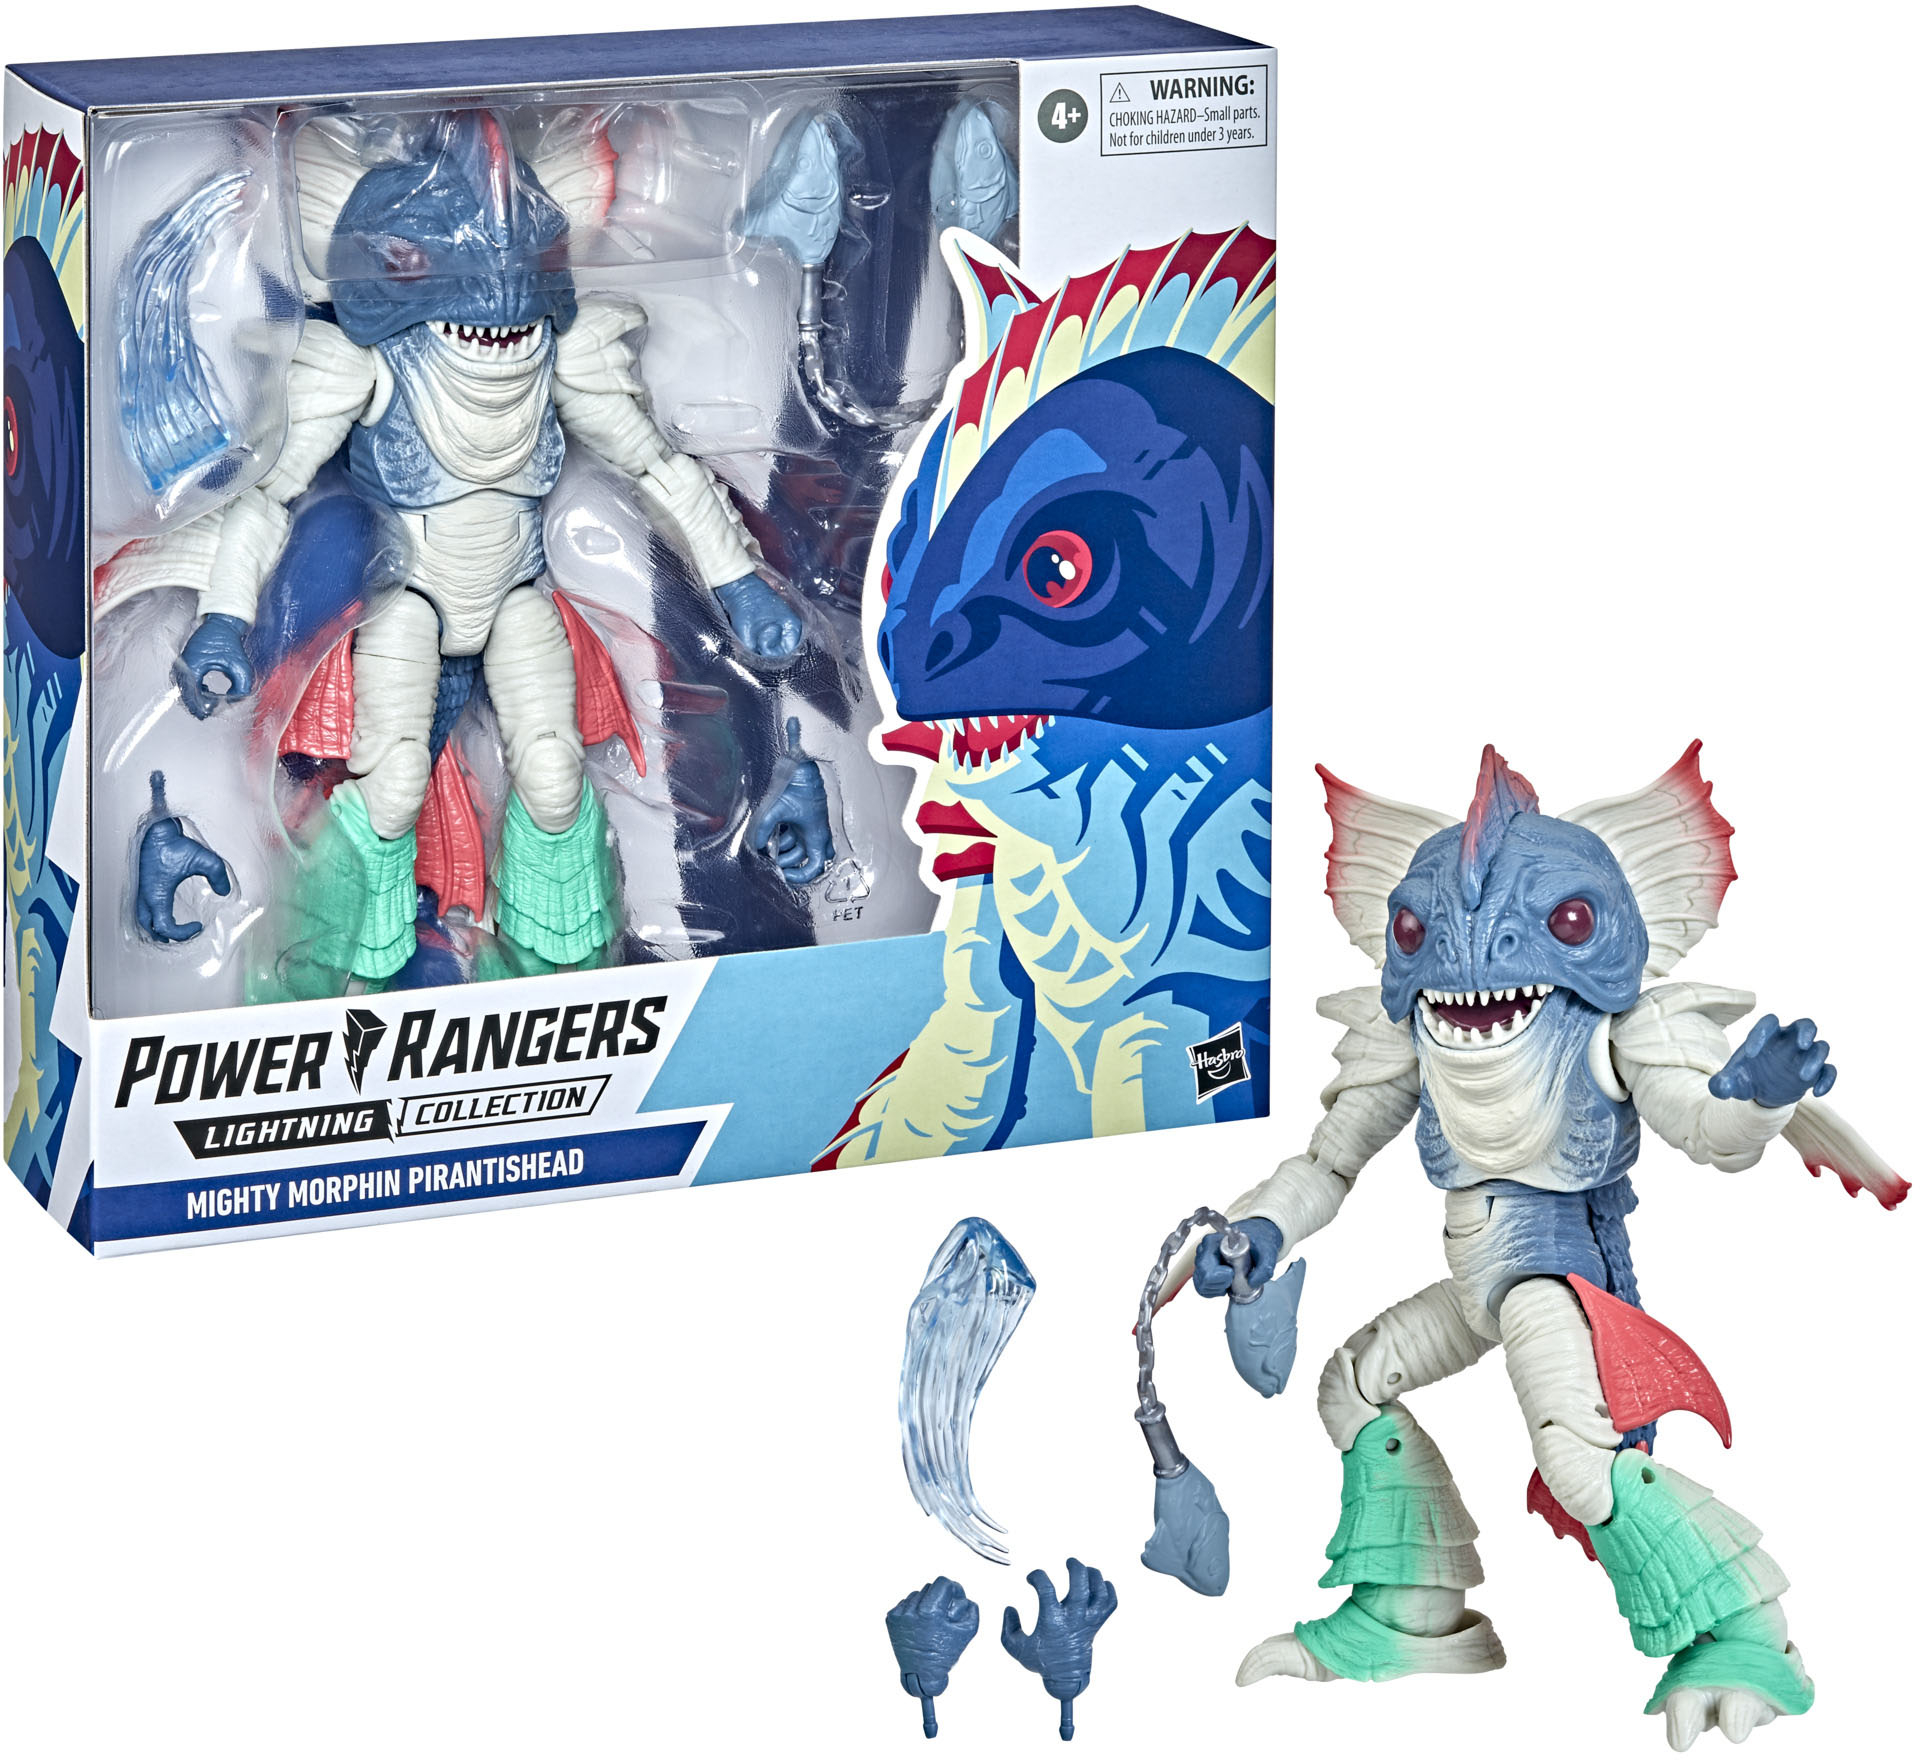 Angle View: Power Rangers Lightning Collection Mighty Morphin Assortment